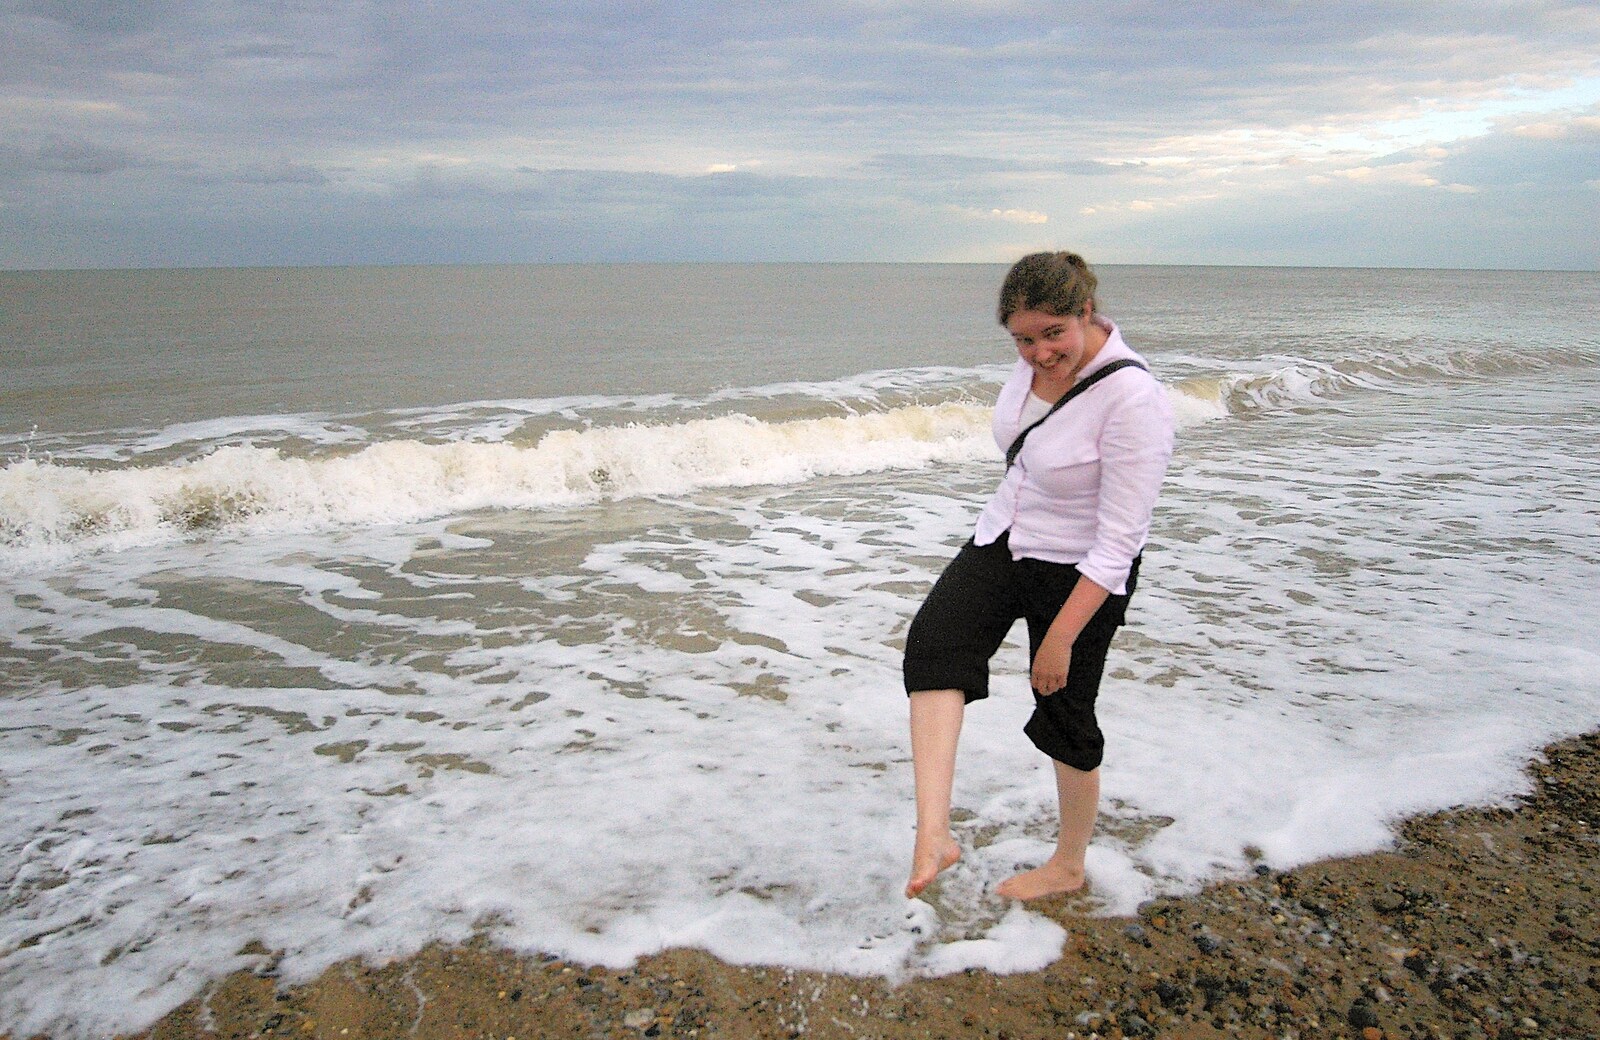 Isobel goes for a paddle in the freezing North Sea from The Regatta Restaurant with Mother and Mike, Aldeburgh, Suffolk - 10th August 2006